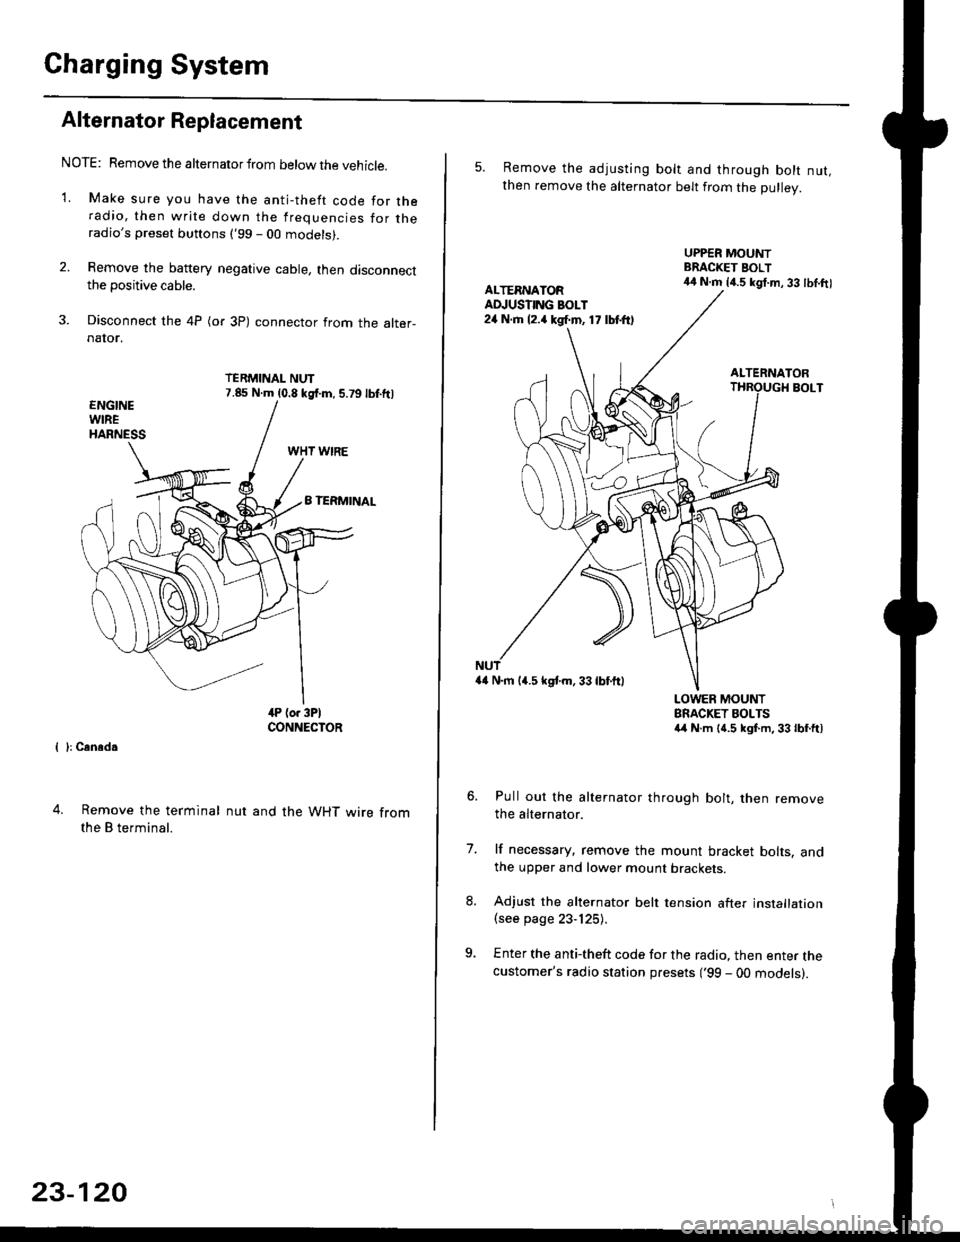 HONDA CIVIC 1996 6.G User Guide Charging System
Alternator Replacement
NOTE: Remove the alternator from below the vehicle.
1. Make sure you have the anti-theft code for theradio, then write down the frequencies for theradios prese